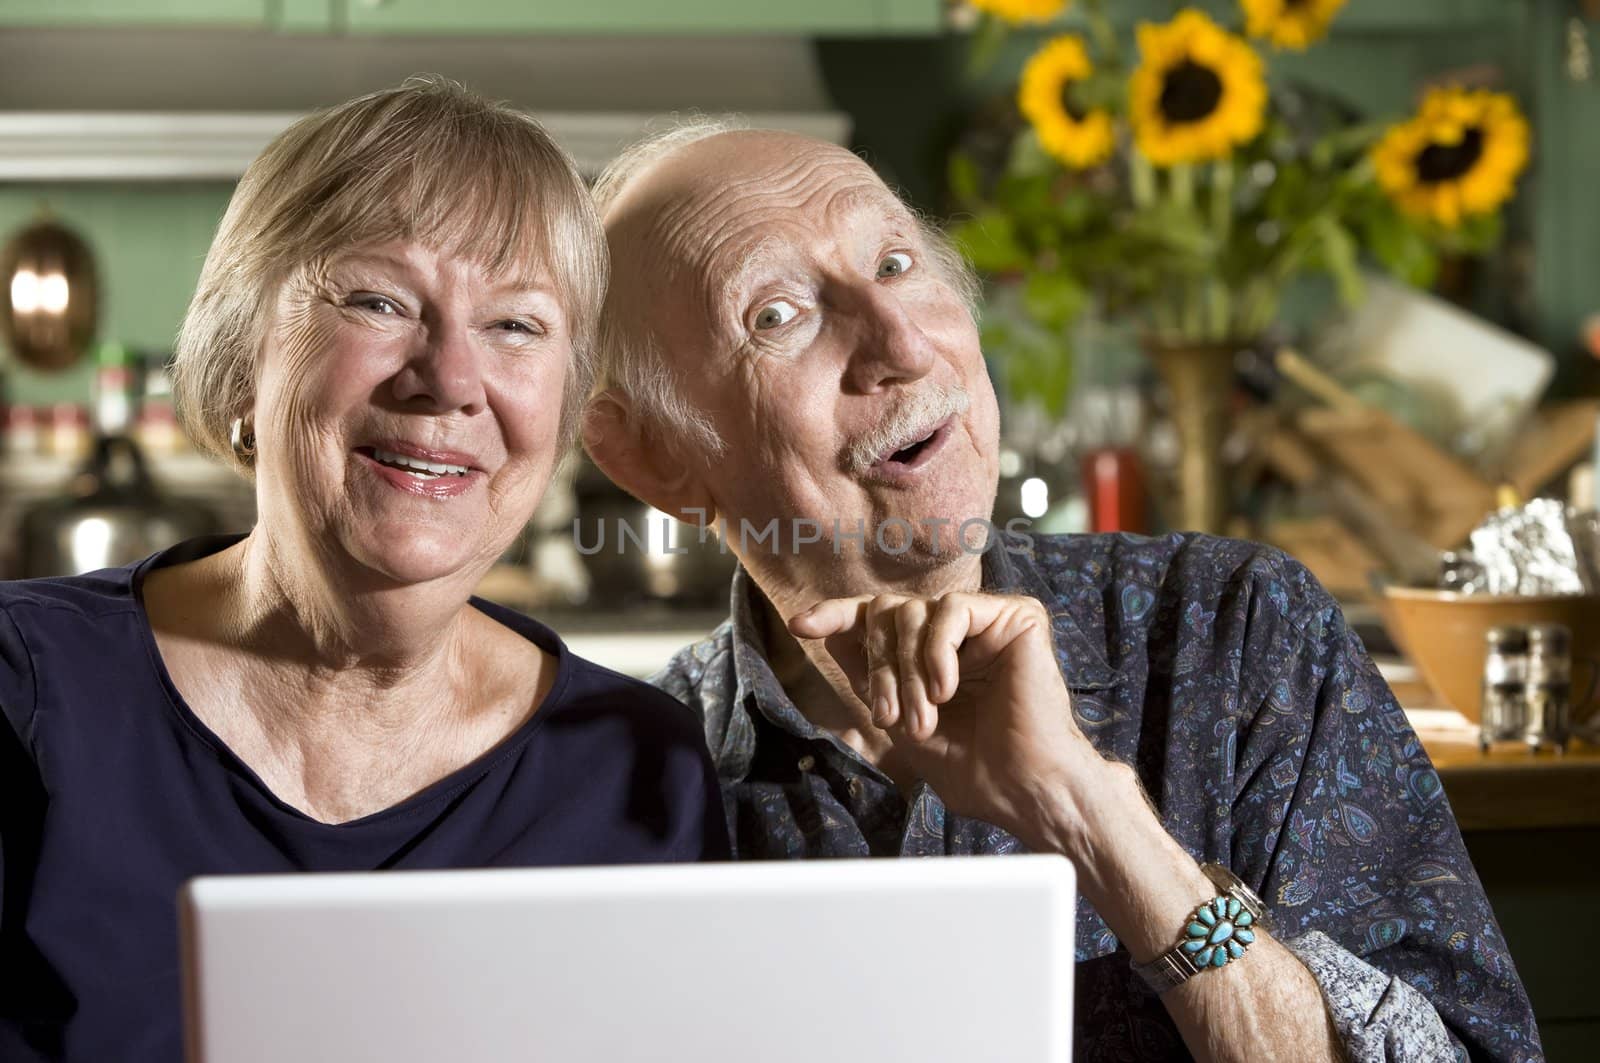 Smiling Senior Couple in their Dining Room with a Laptop Computer